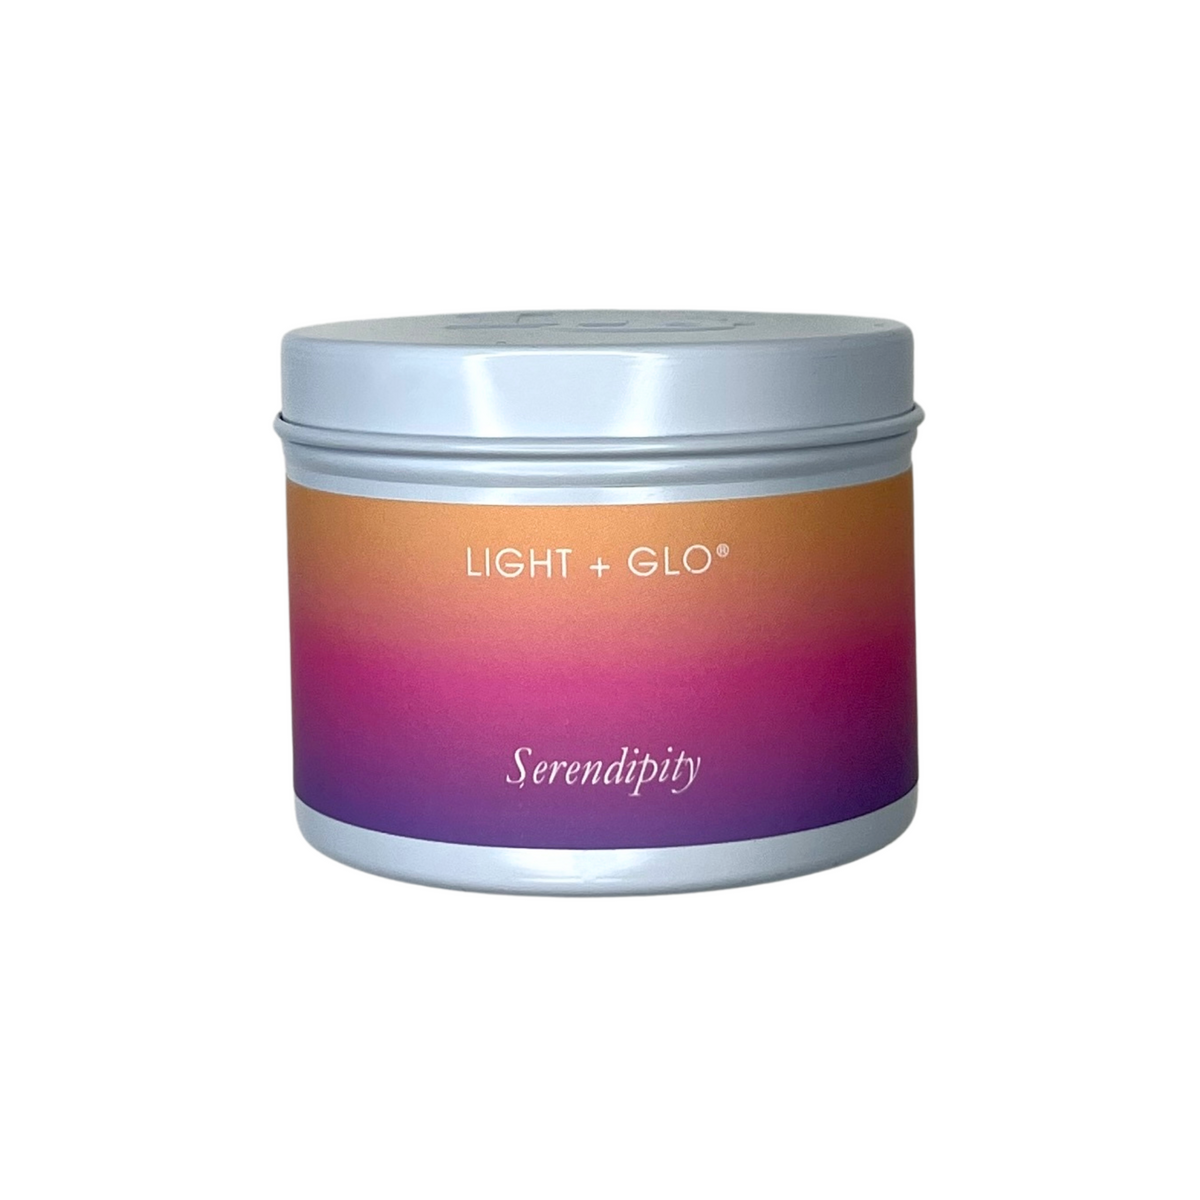 Santorini Travel Candle - Serendipity | Luxury Candles &amp; Home Fragrances by Light + Glo